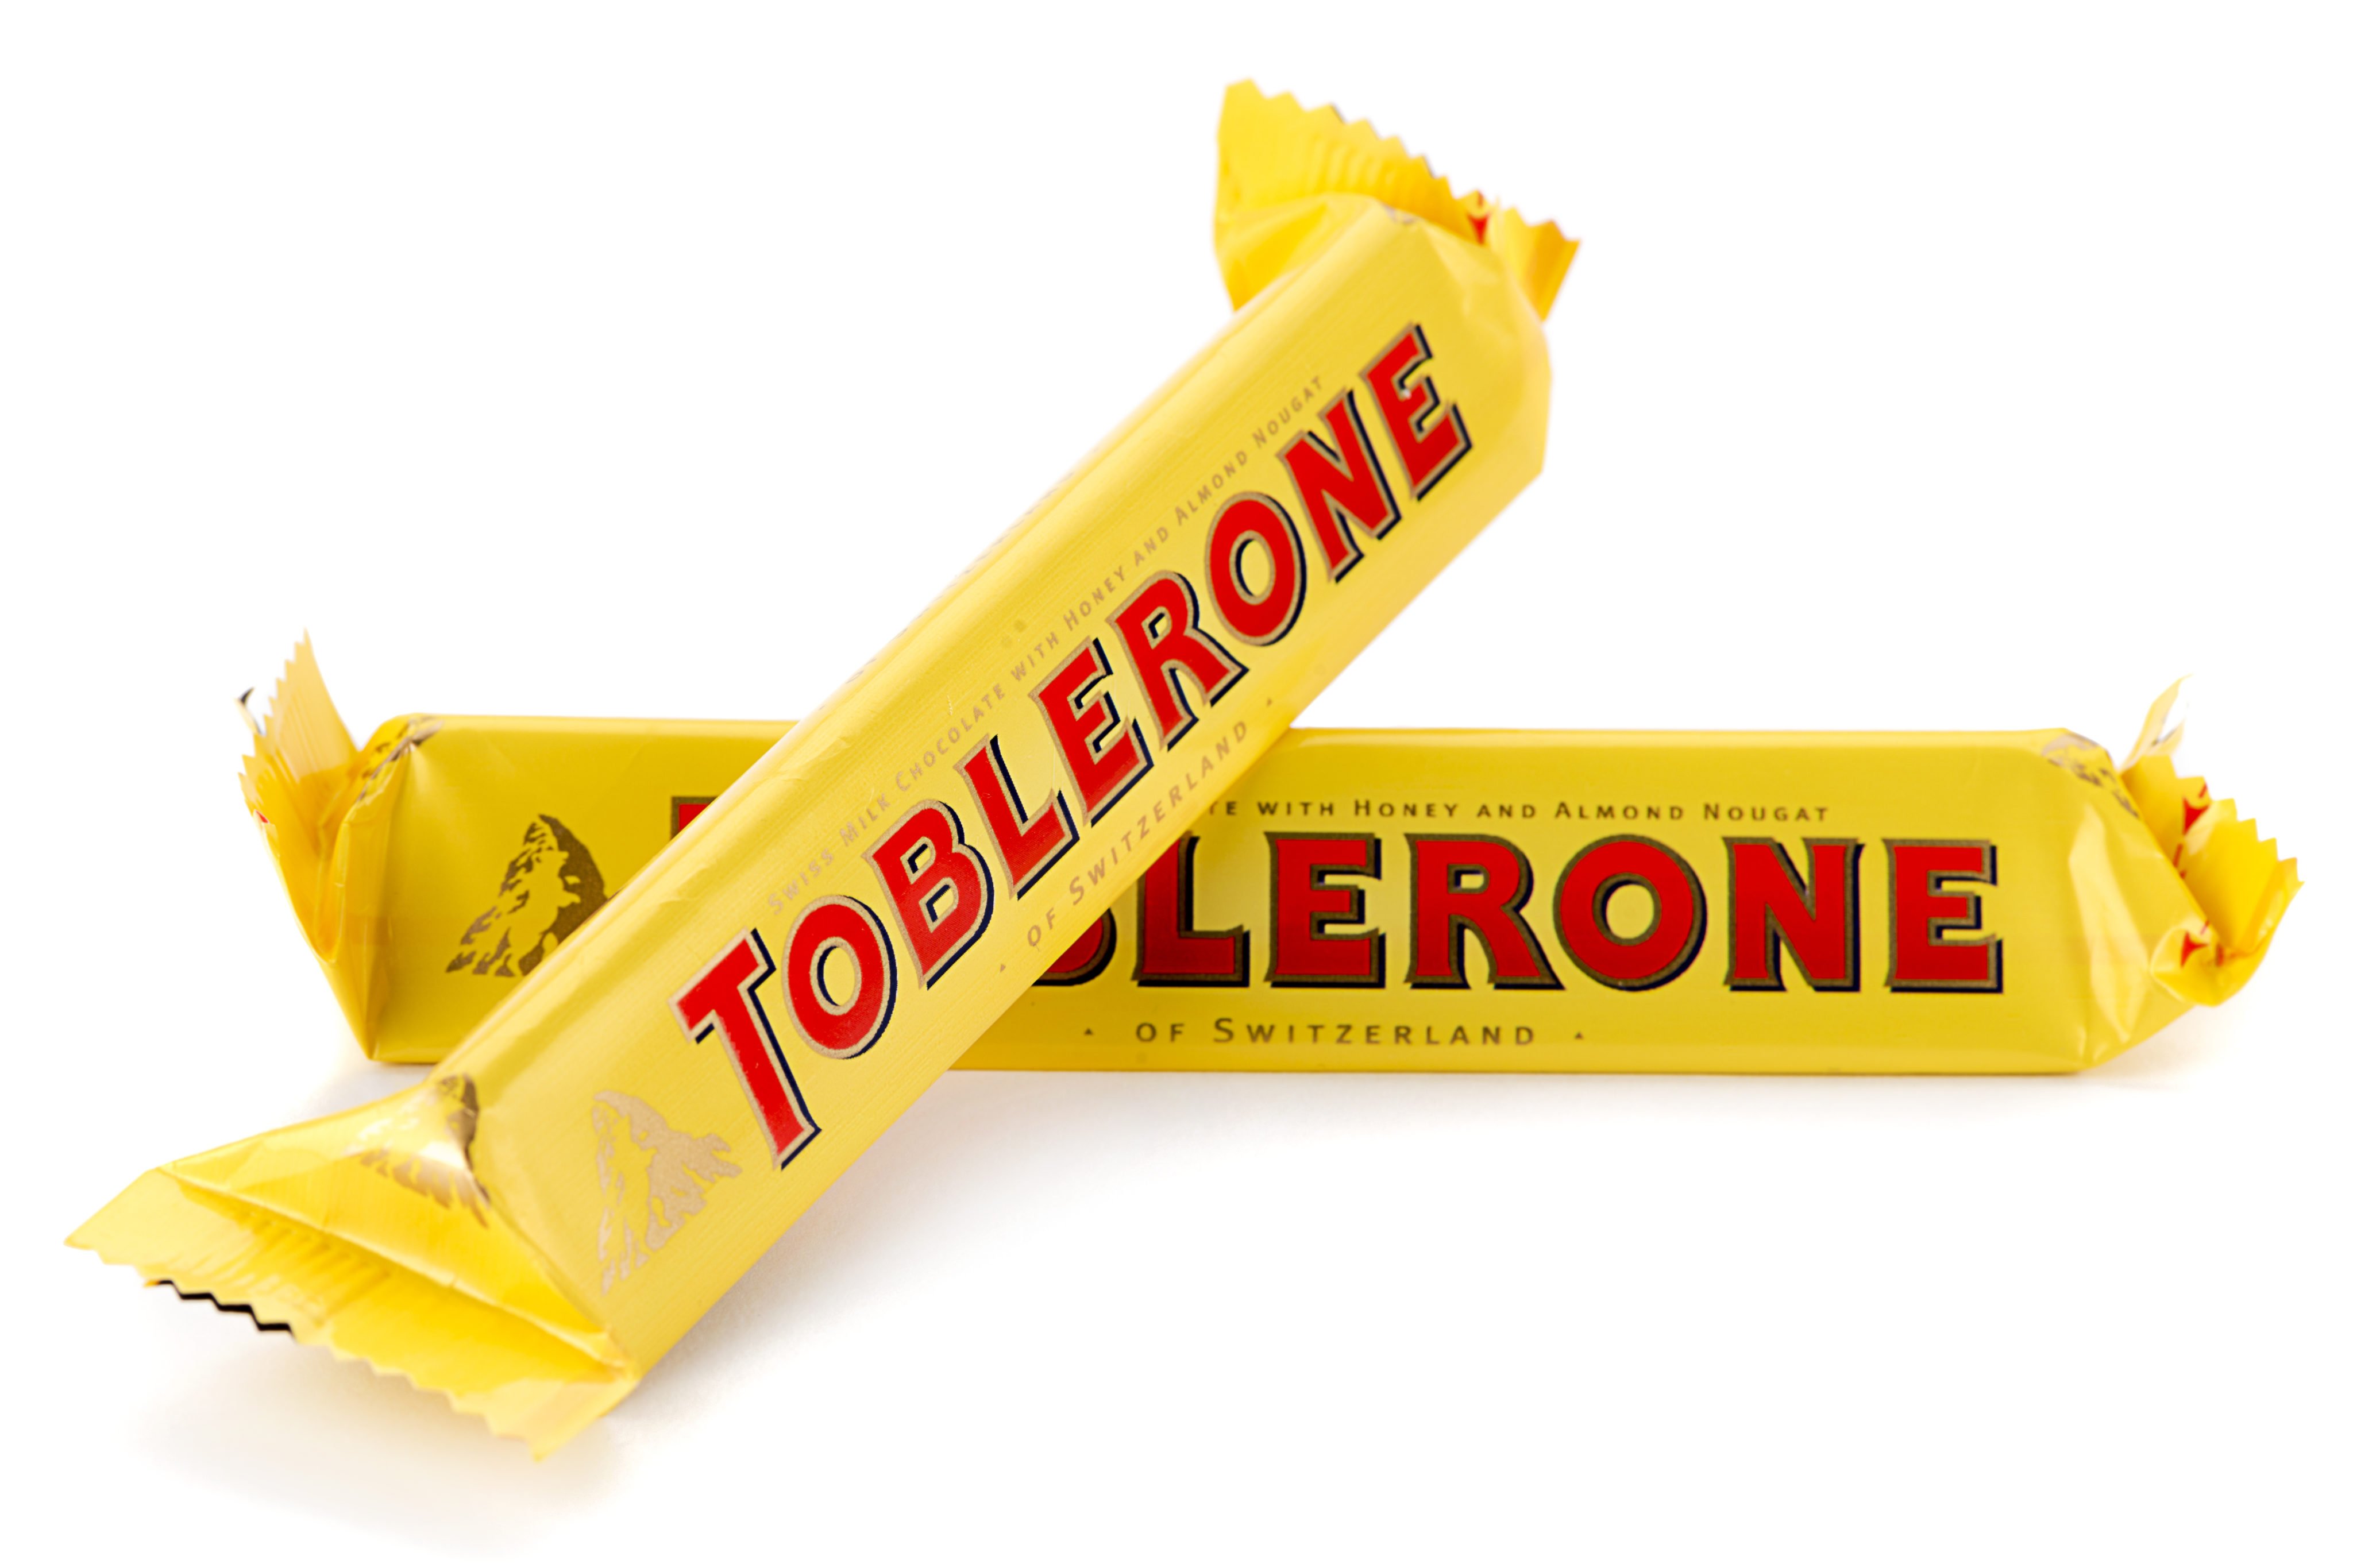 Toblerone has launched a brand new chocolate orange flavour Proper